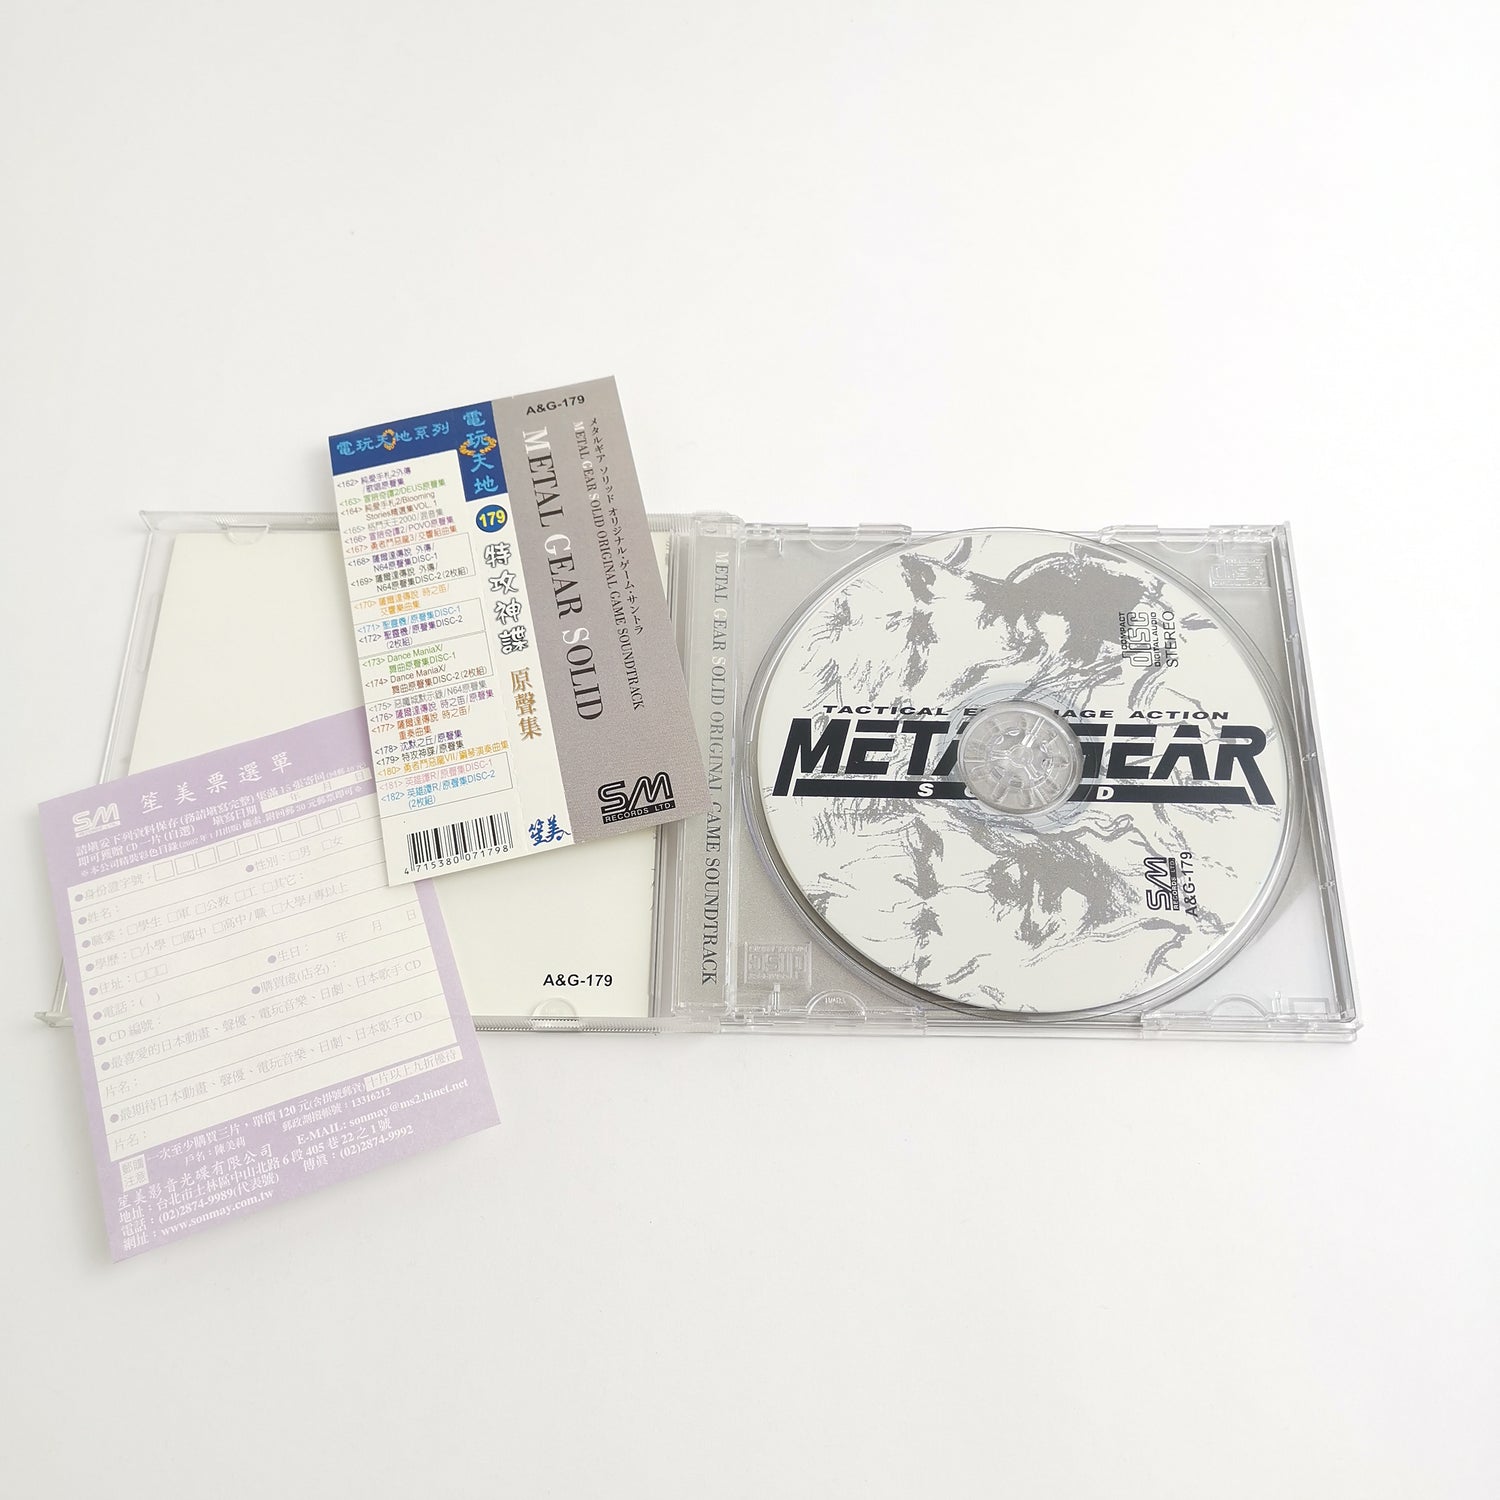 Audio soundtrack CD for the game: Metal Gear Solid - PS1